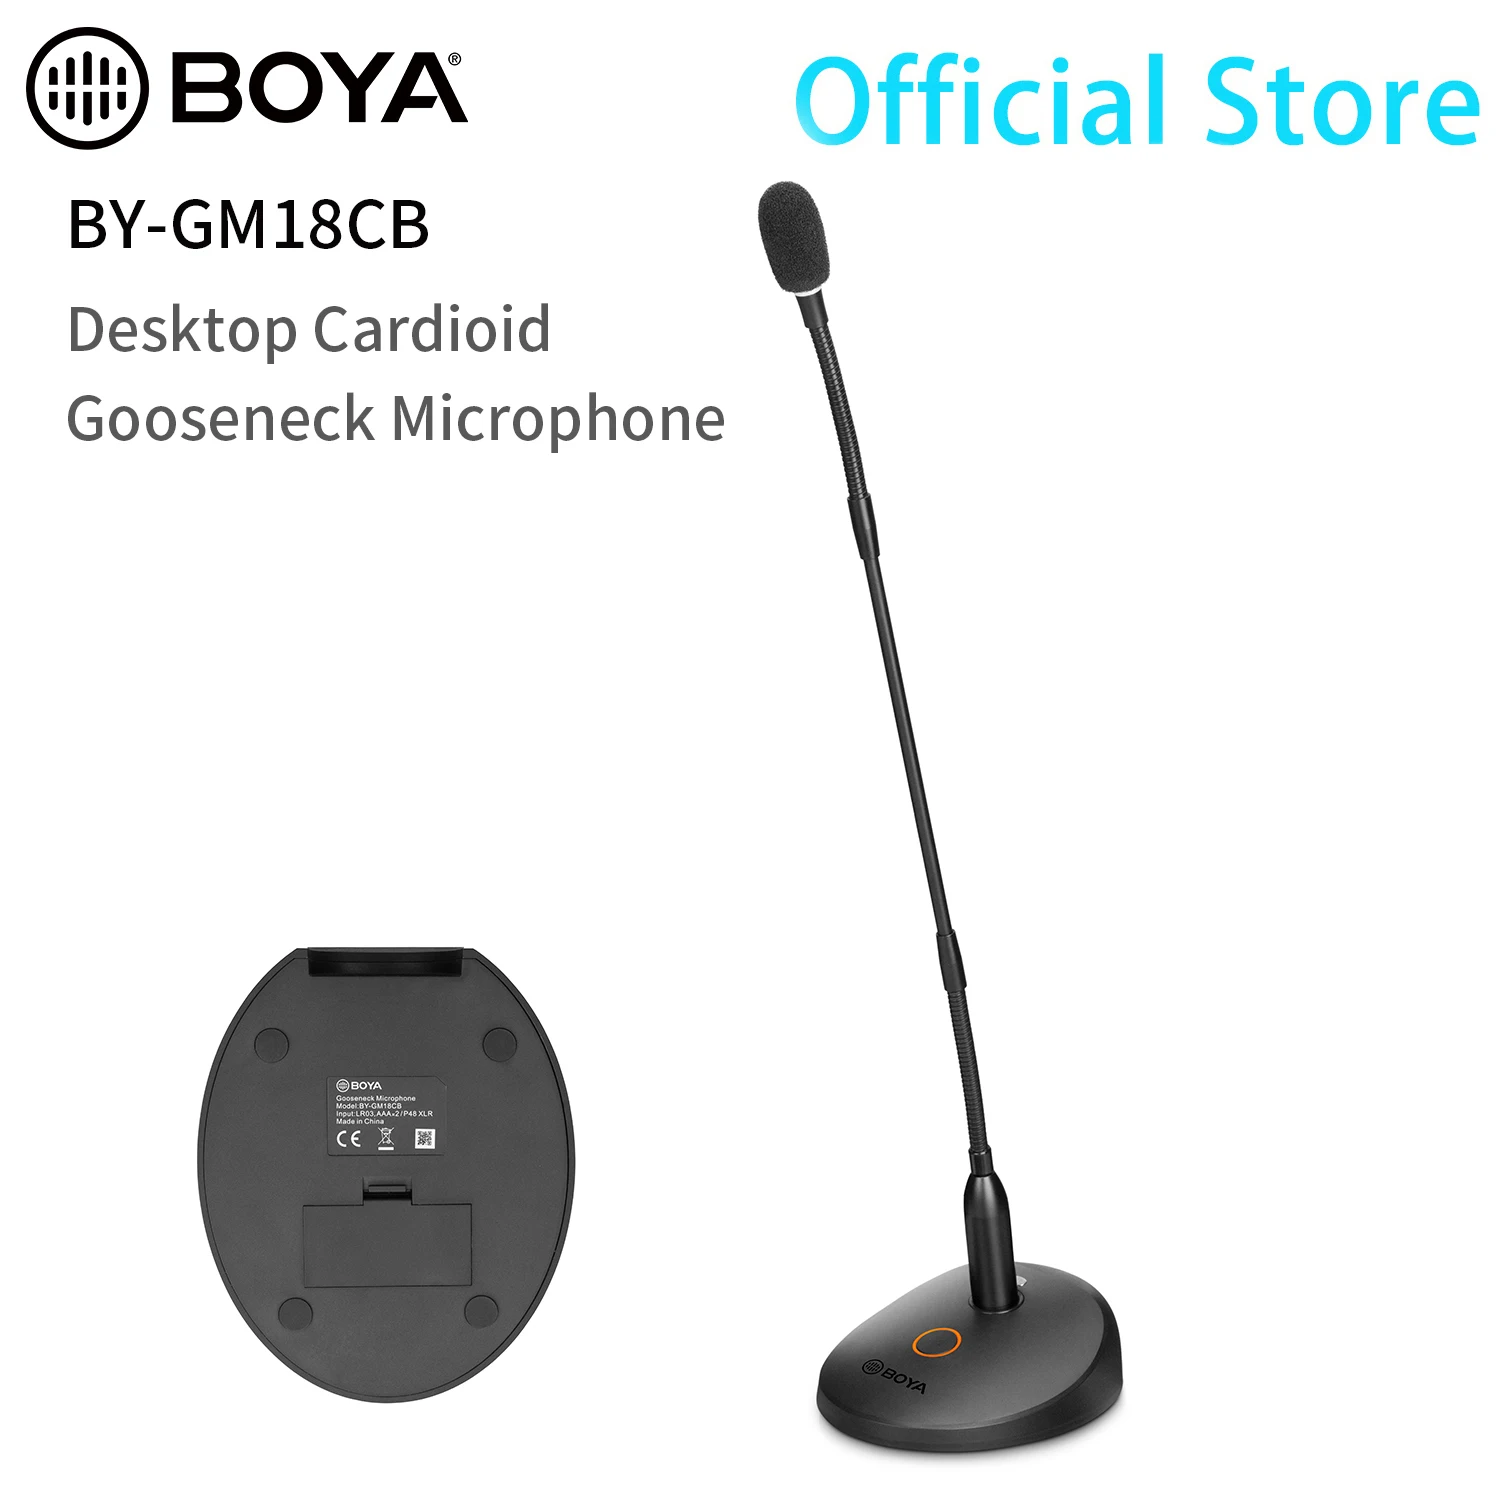 BOYA BY-GM18CB Desktop Meeting Conference Gooseneck Condenser Microphone with XLR Connector for Video Conferences Streaming